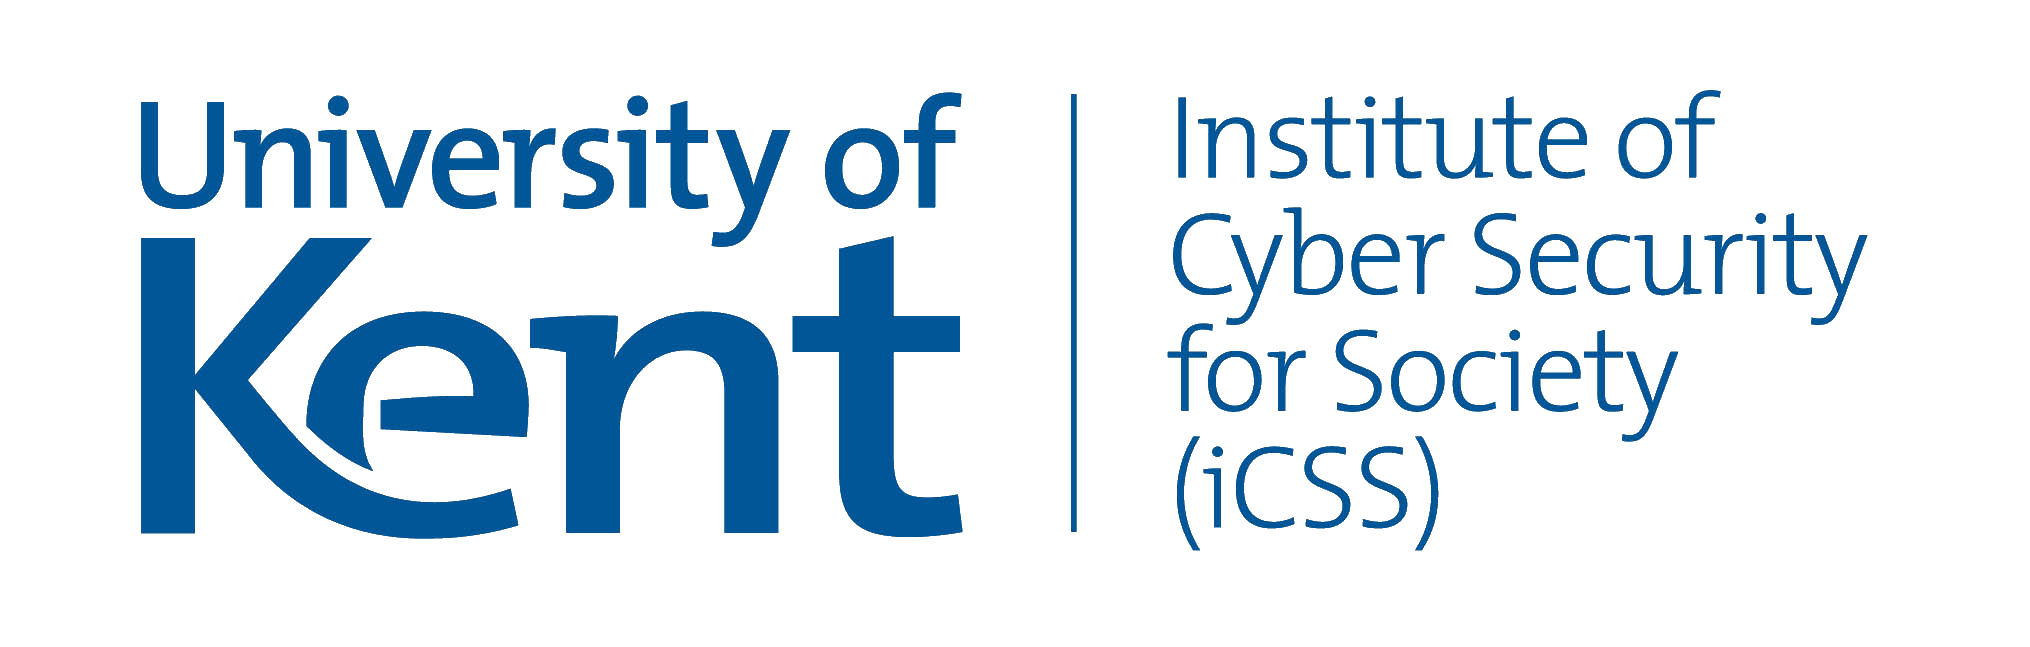 Institute of Cyber Security for Society (iCSS), University of Kent, UK